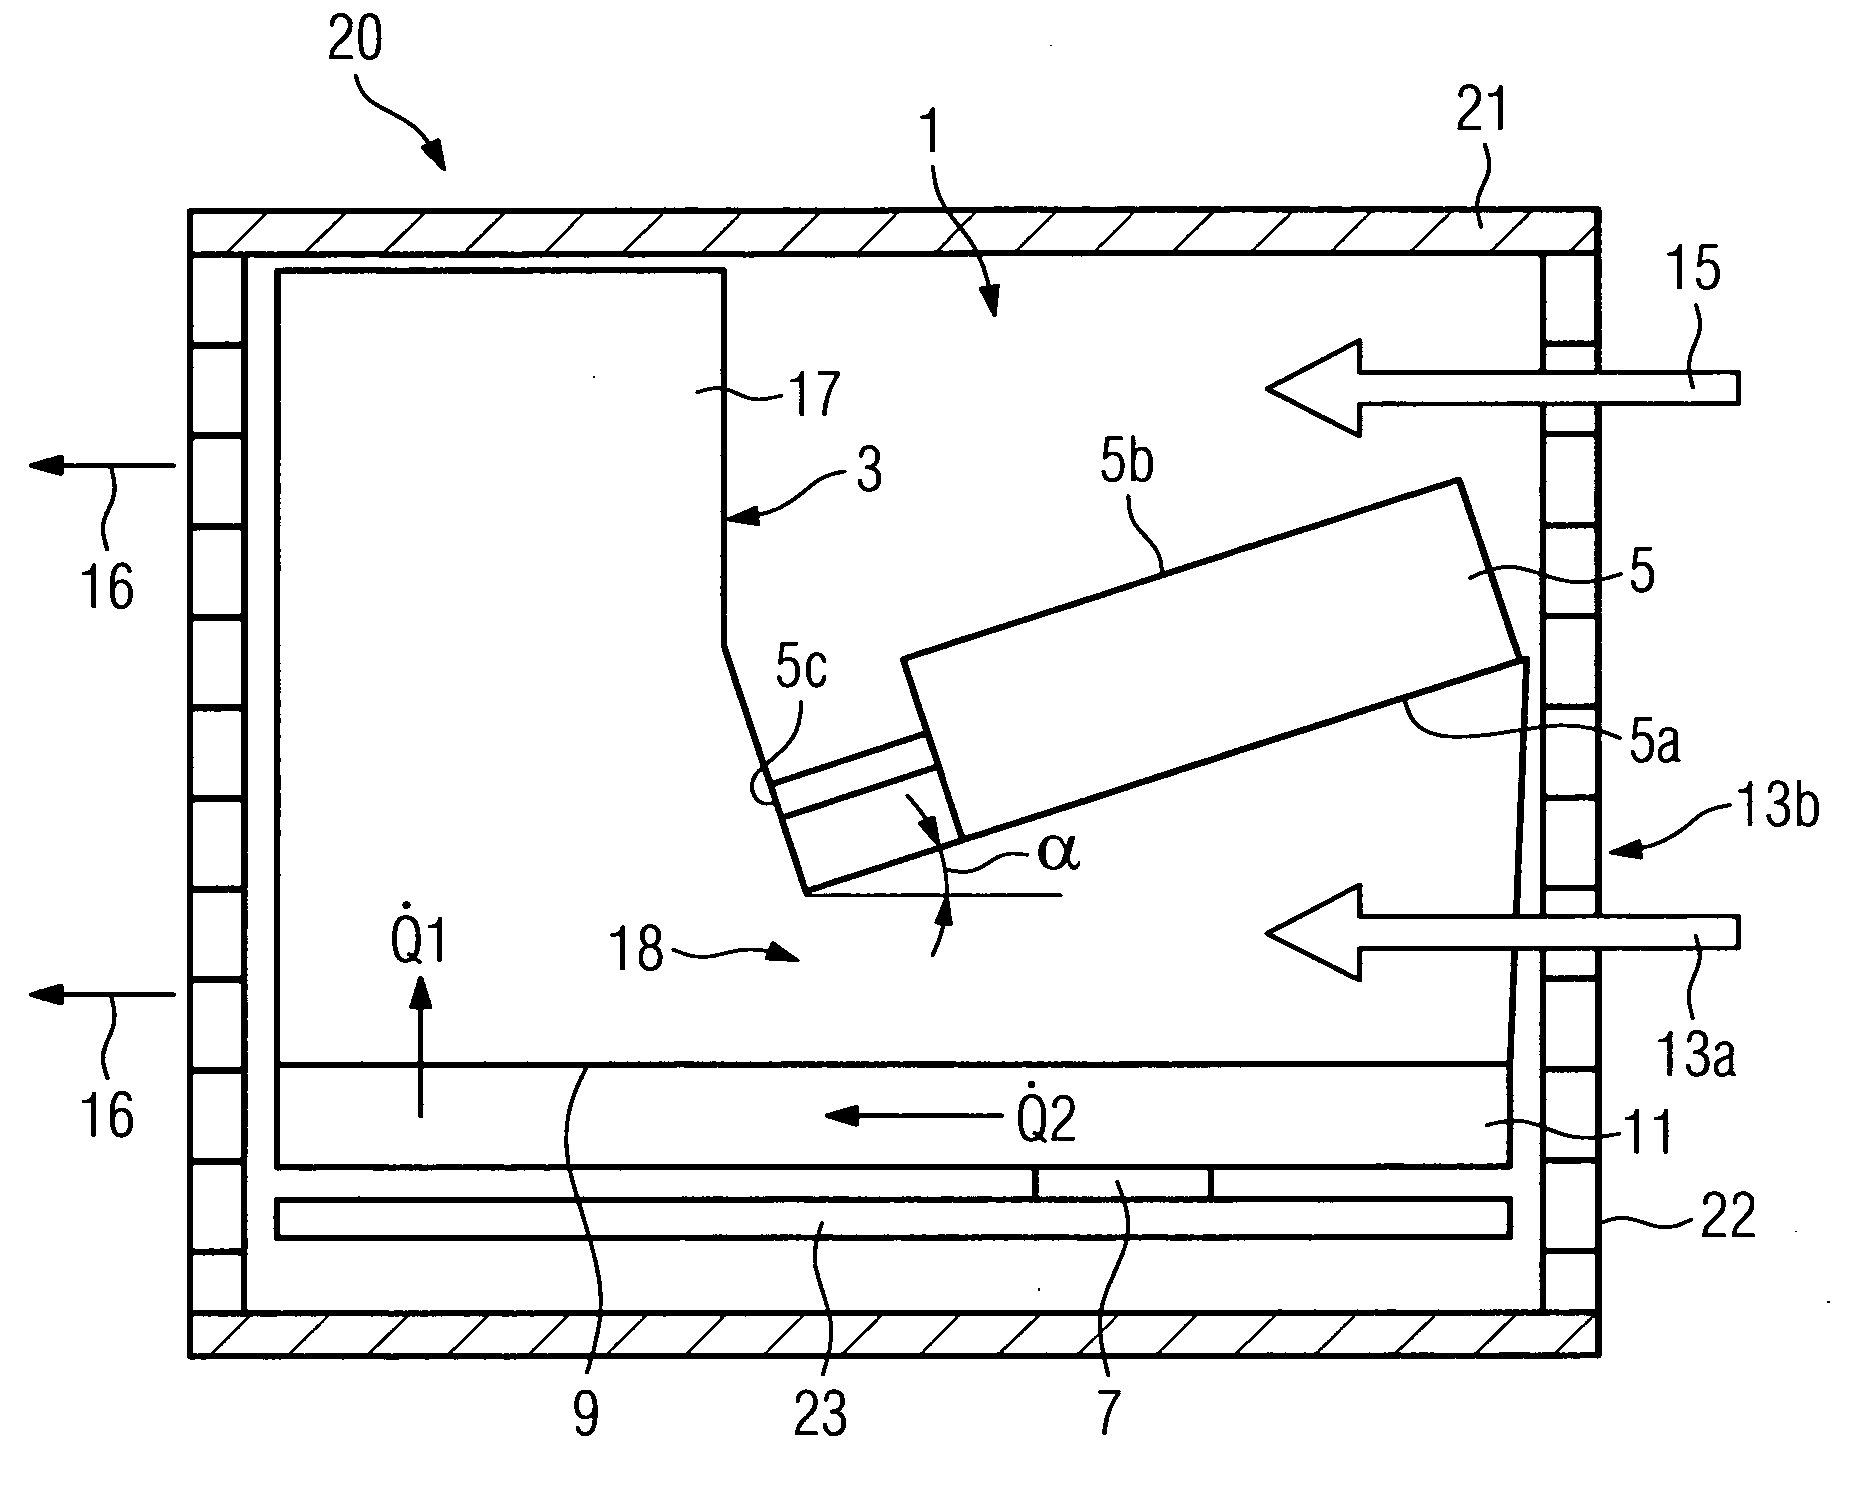 Cooling facility for cooling a component